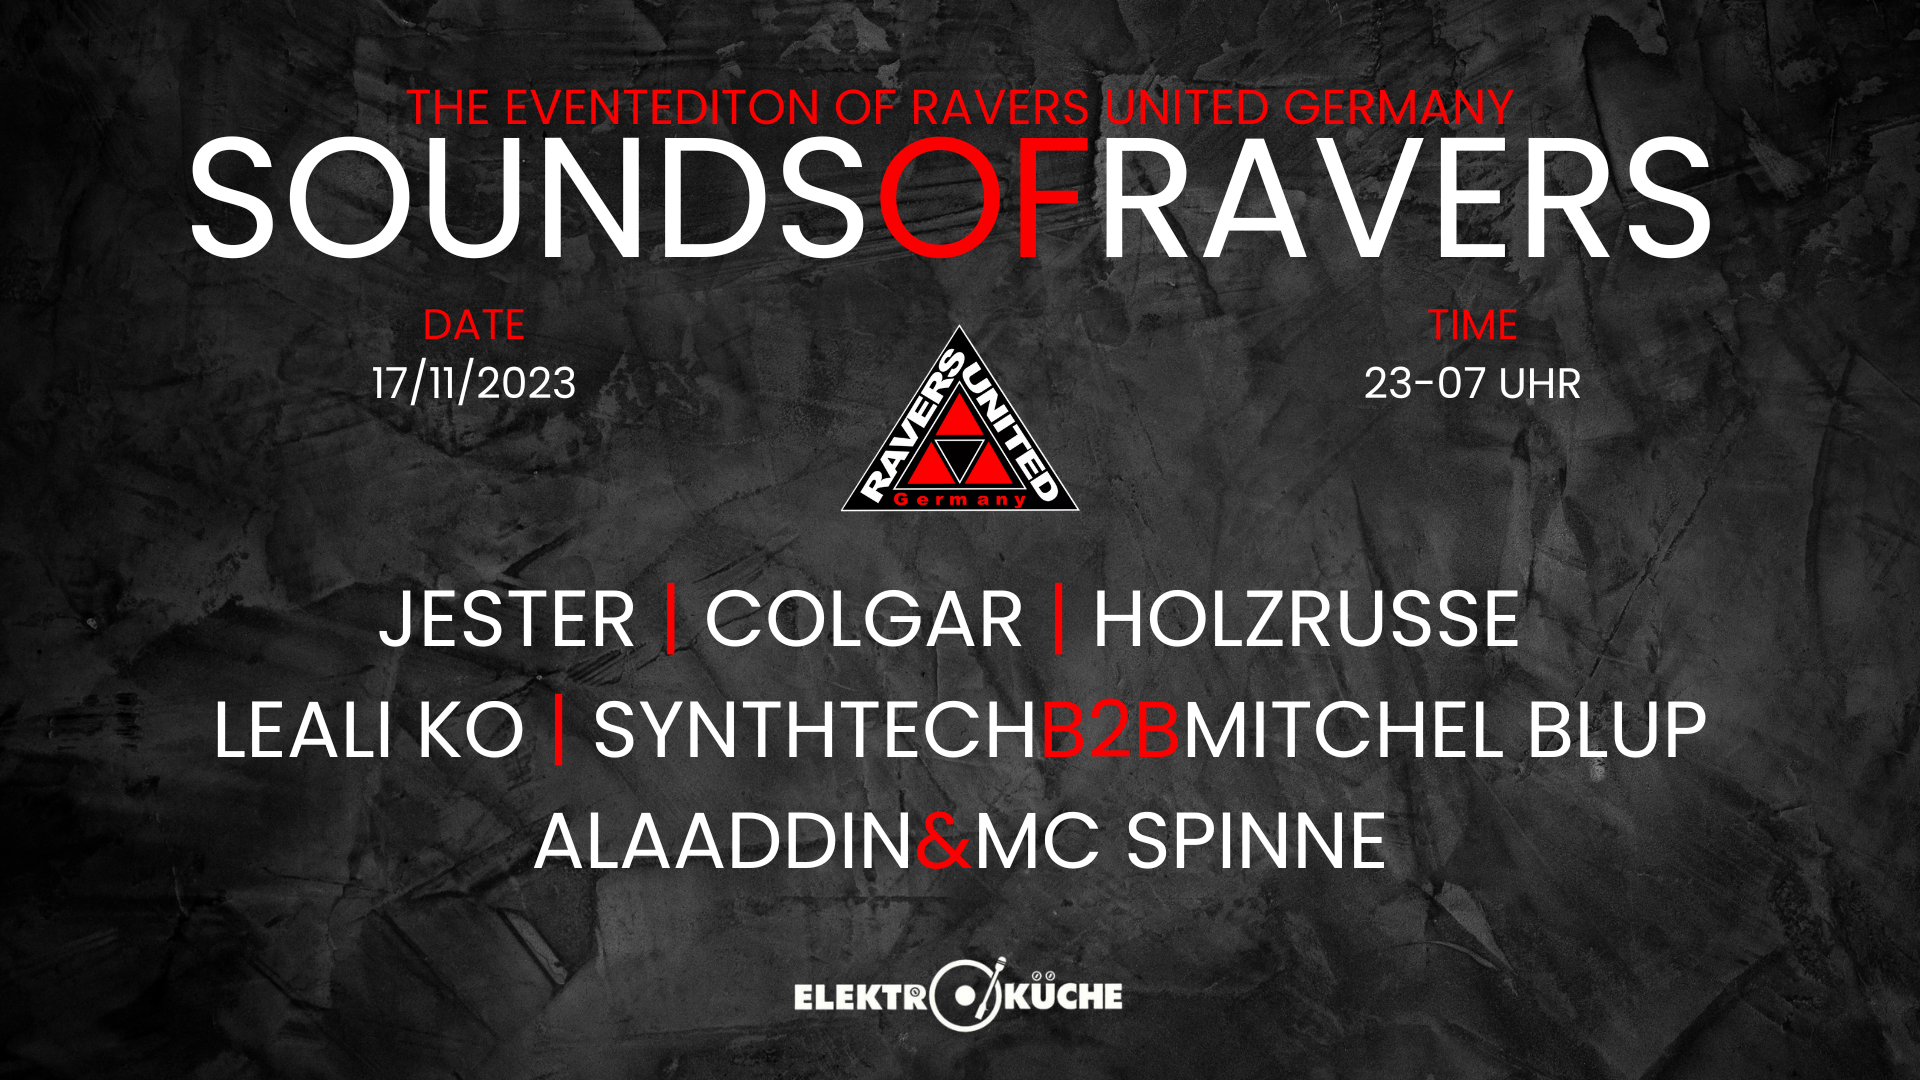 SOUNDS OF RAVERS 6